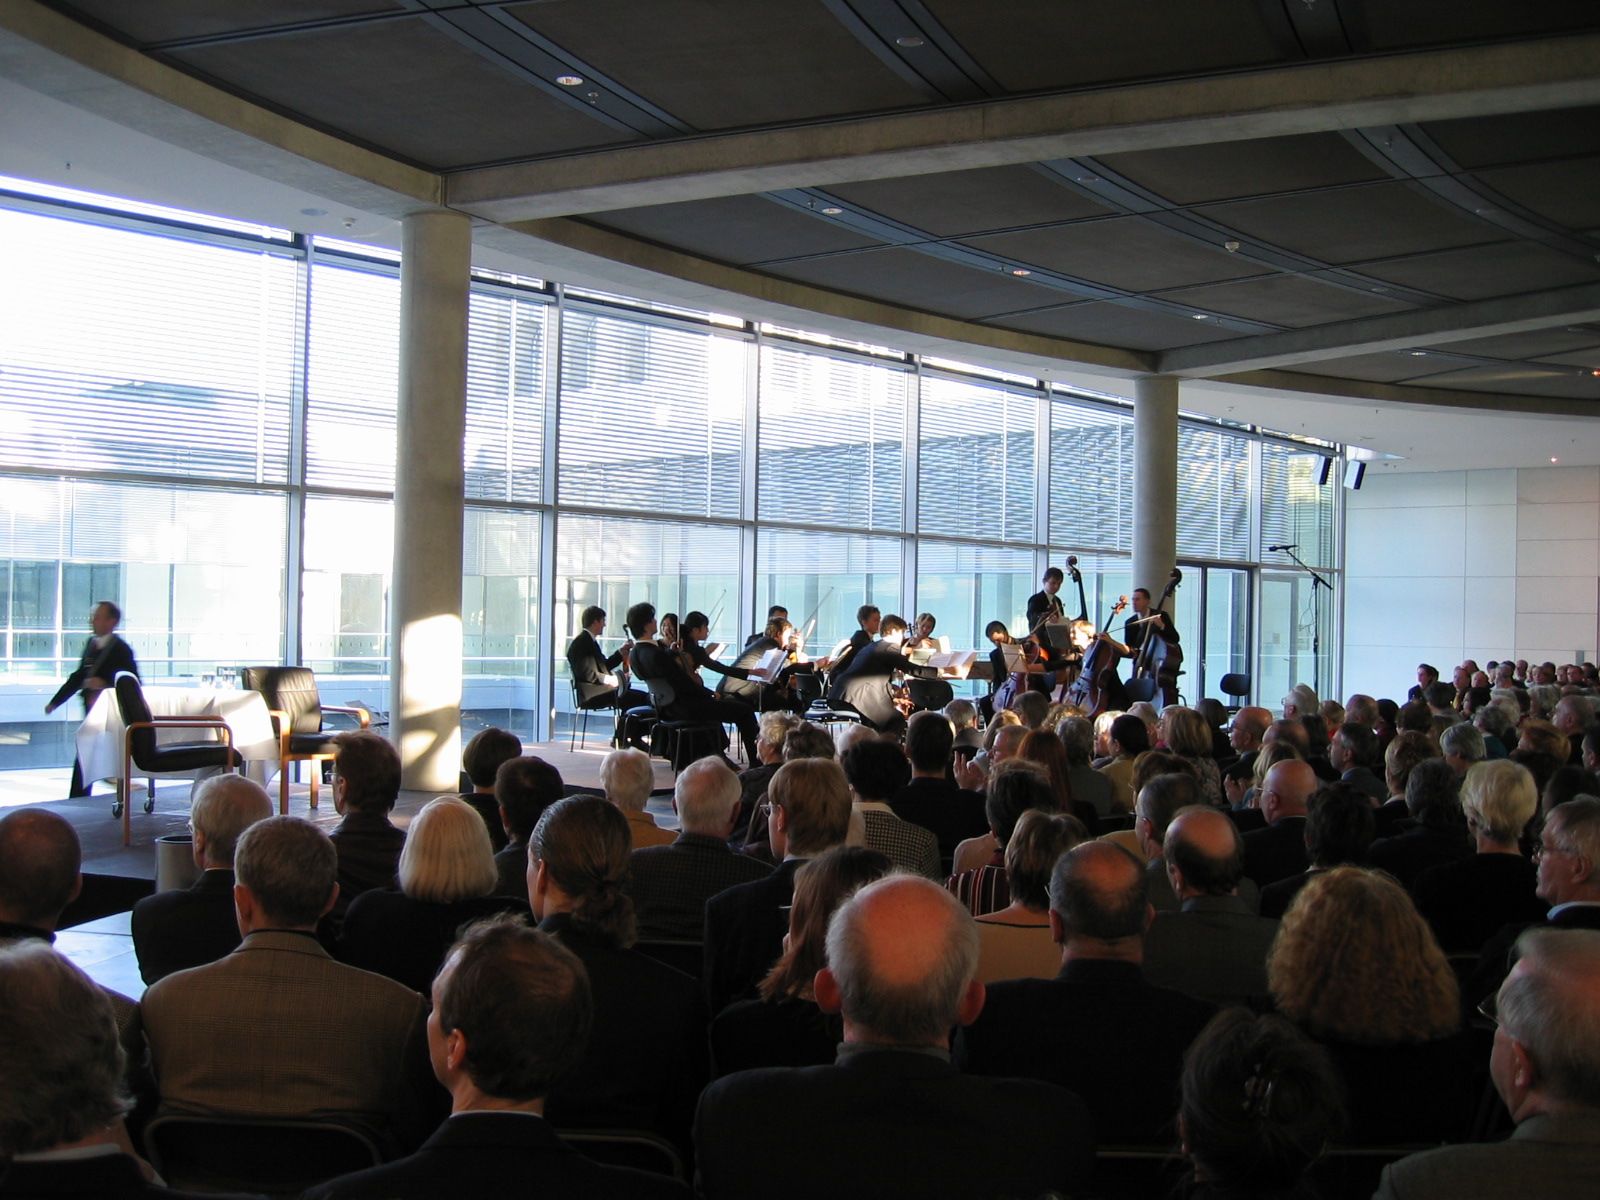 Concert at the newly opened German Bundestag